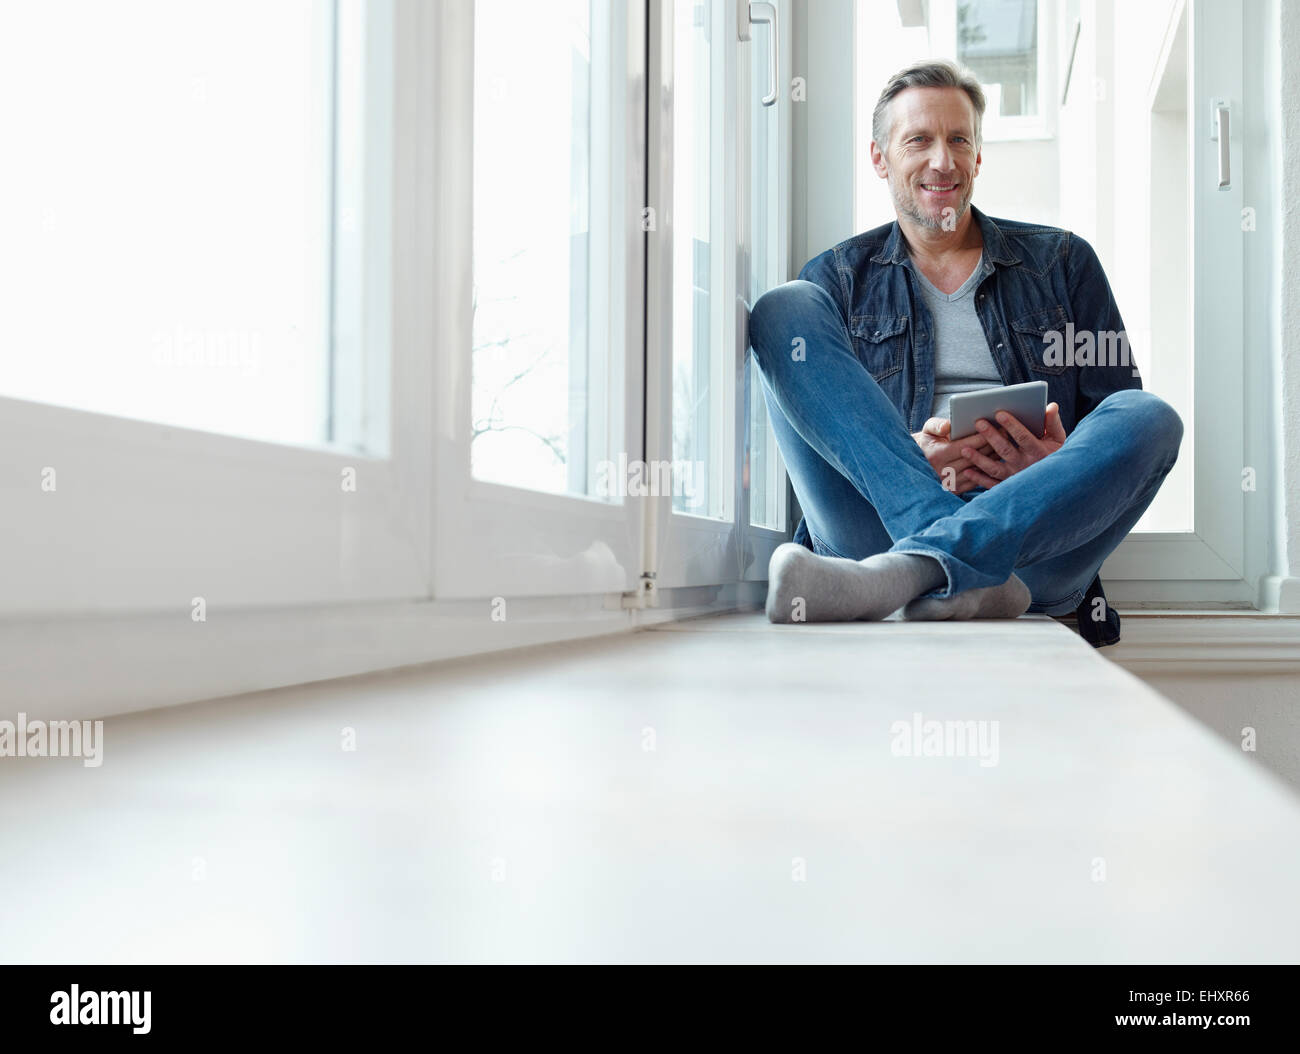 Germany, Cologne, Mature man sitting at window using digital tablet Stock Photo